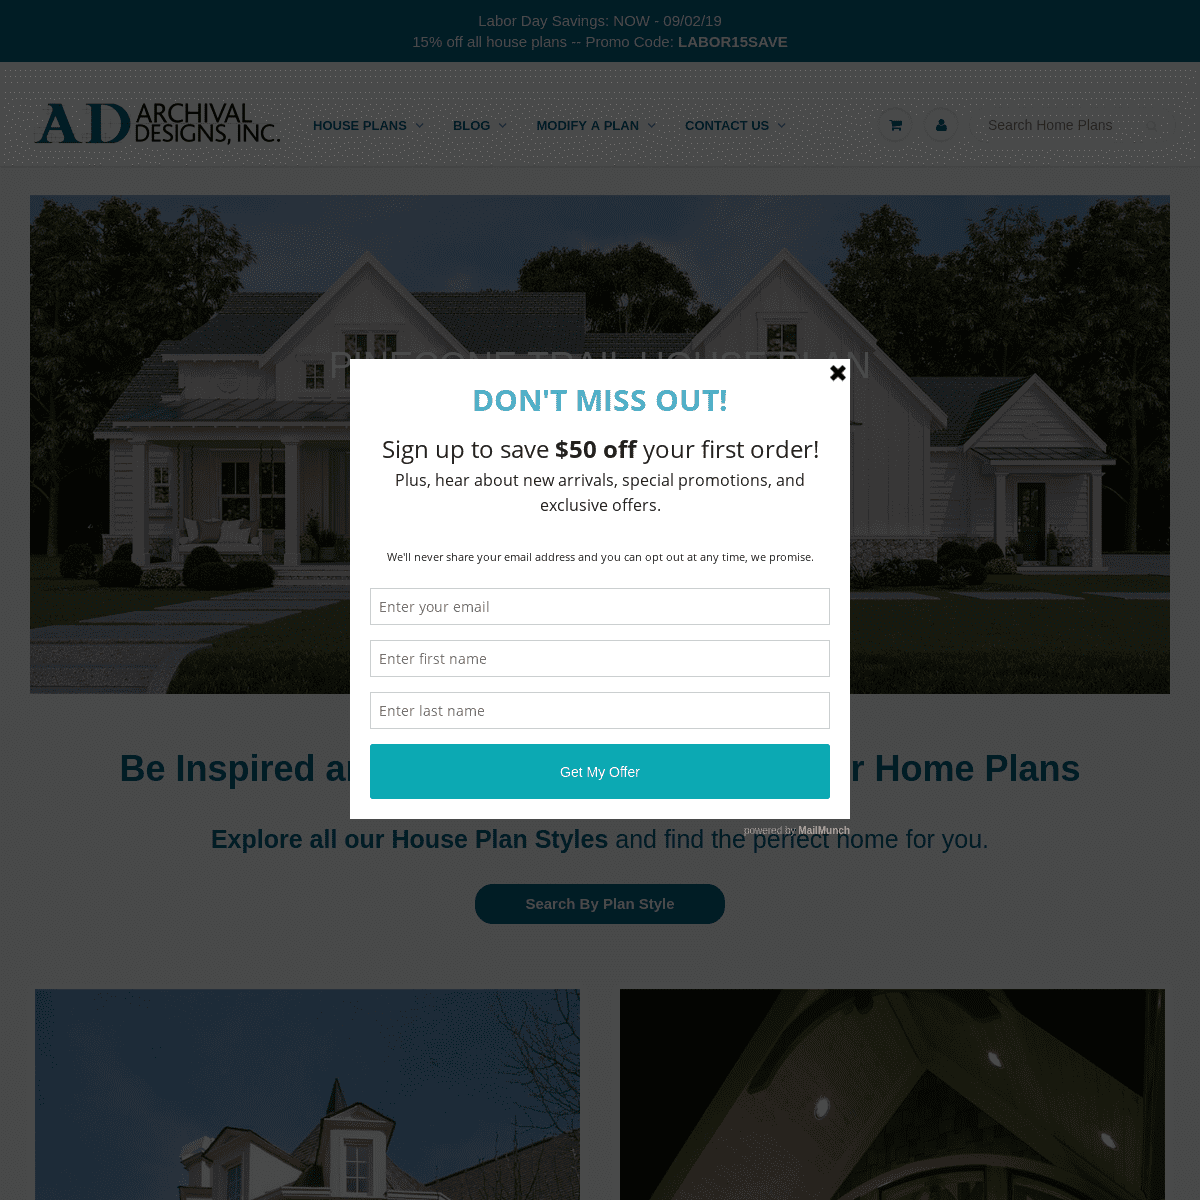 A complete backup of archivaldesigns.com